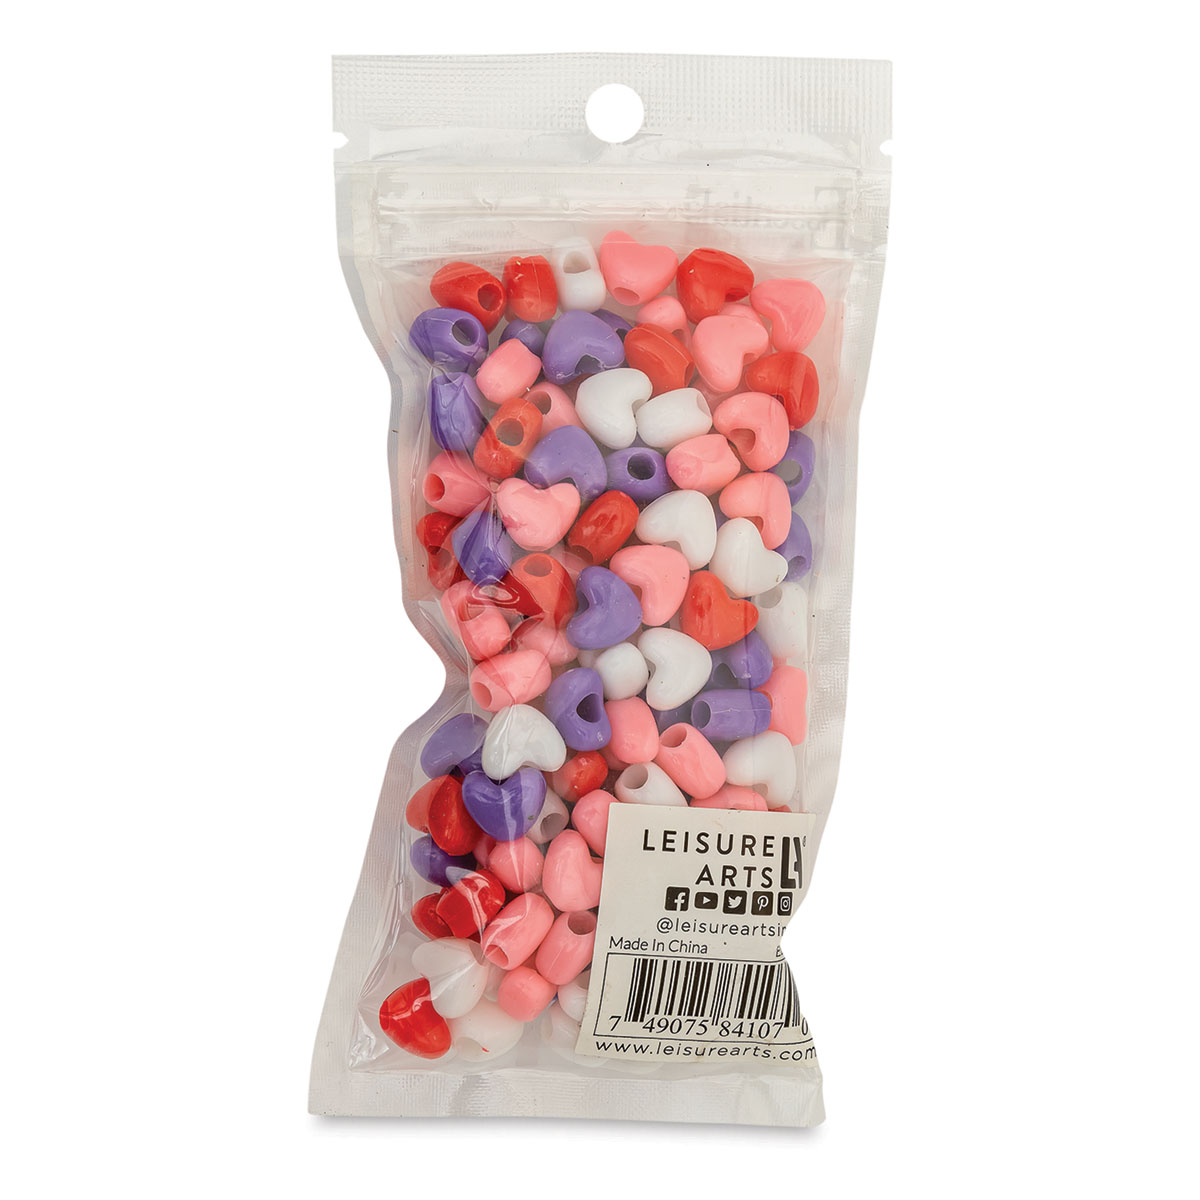 Essentials by Leisure Arts Heart Beads